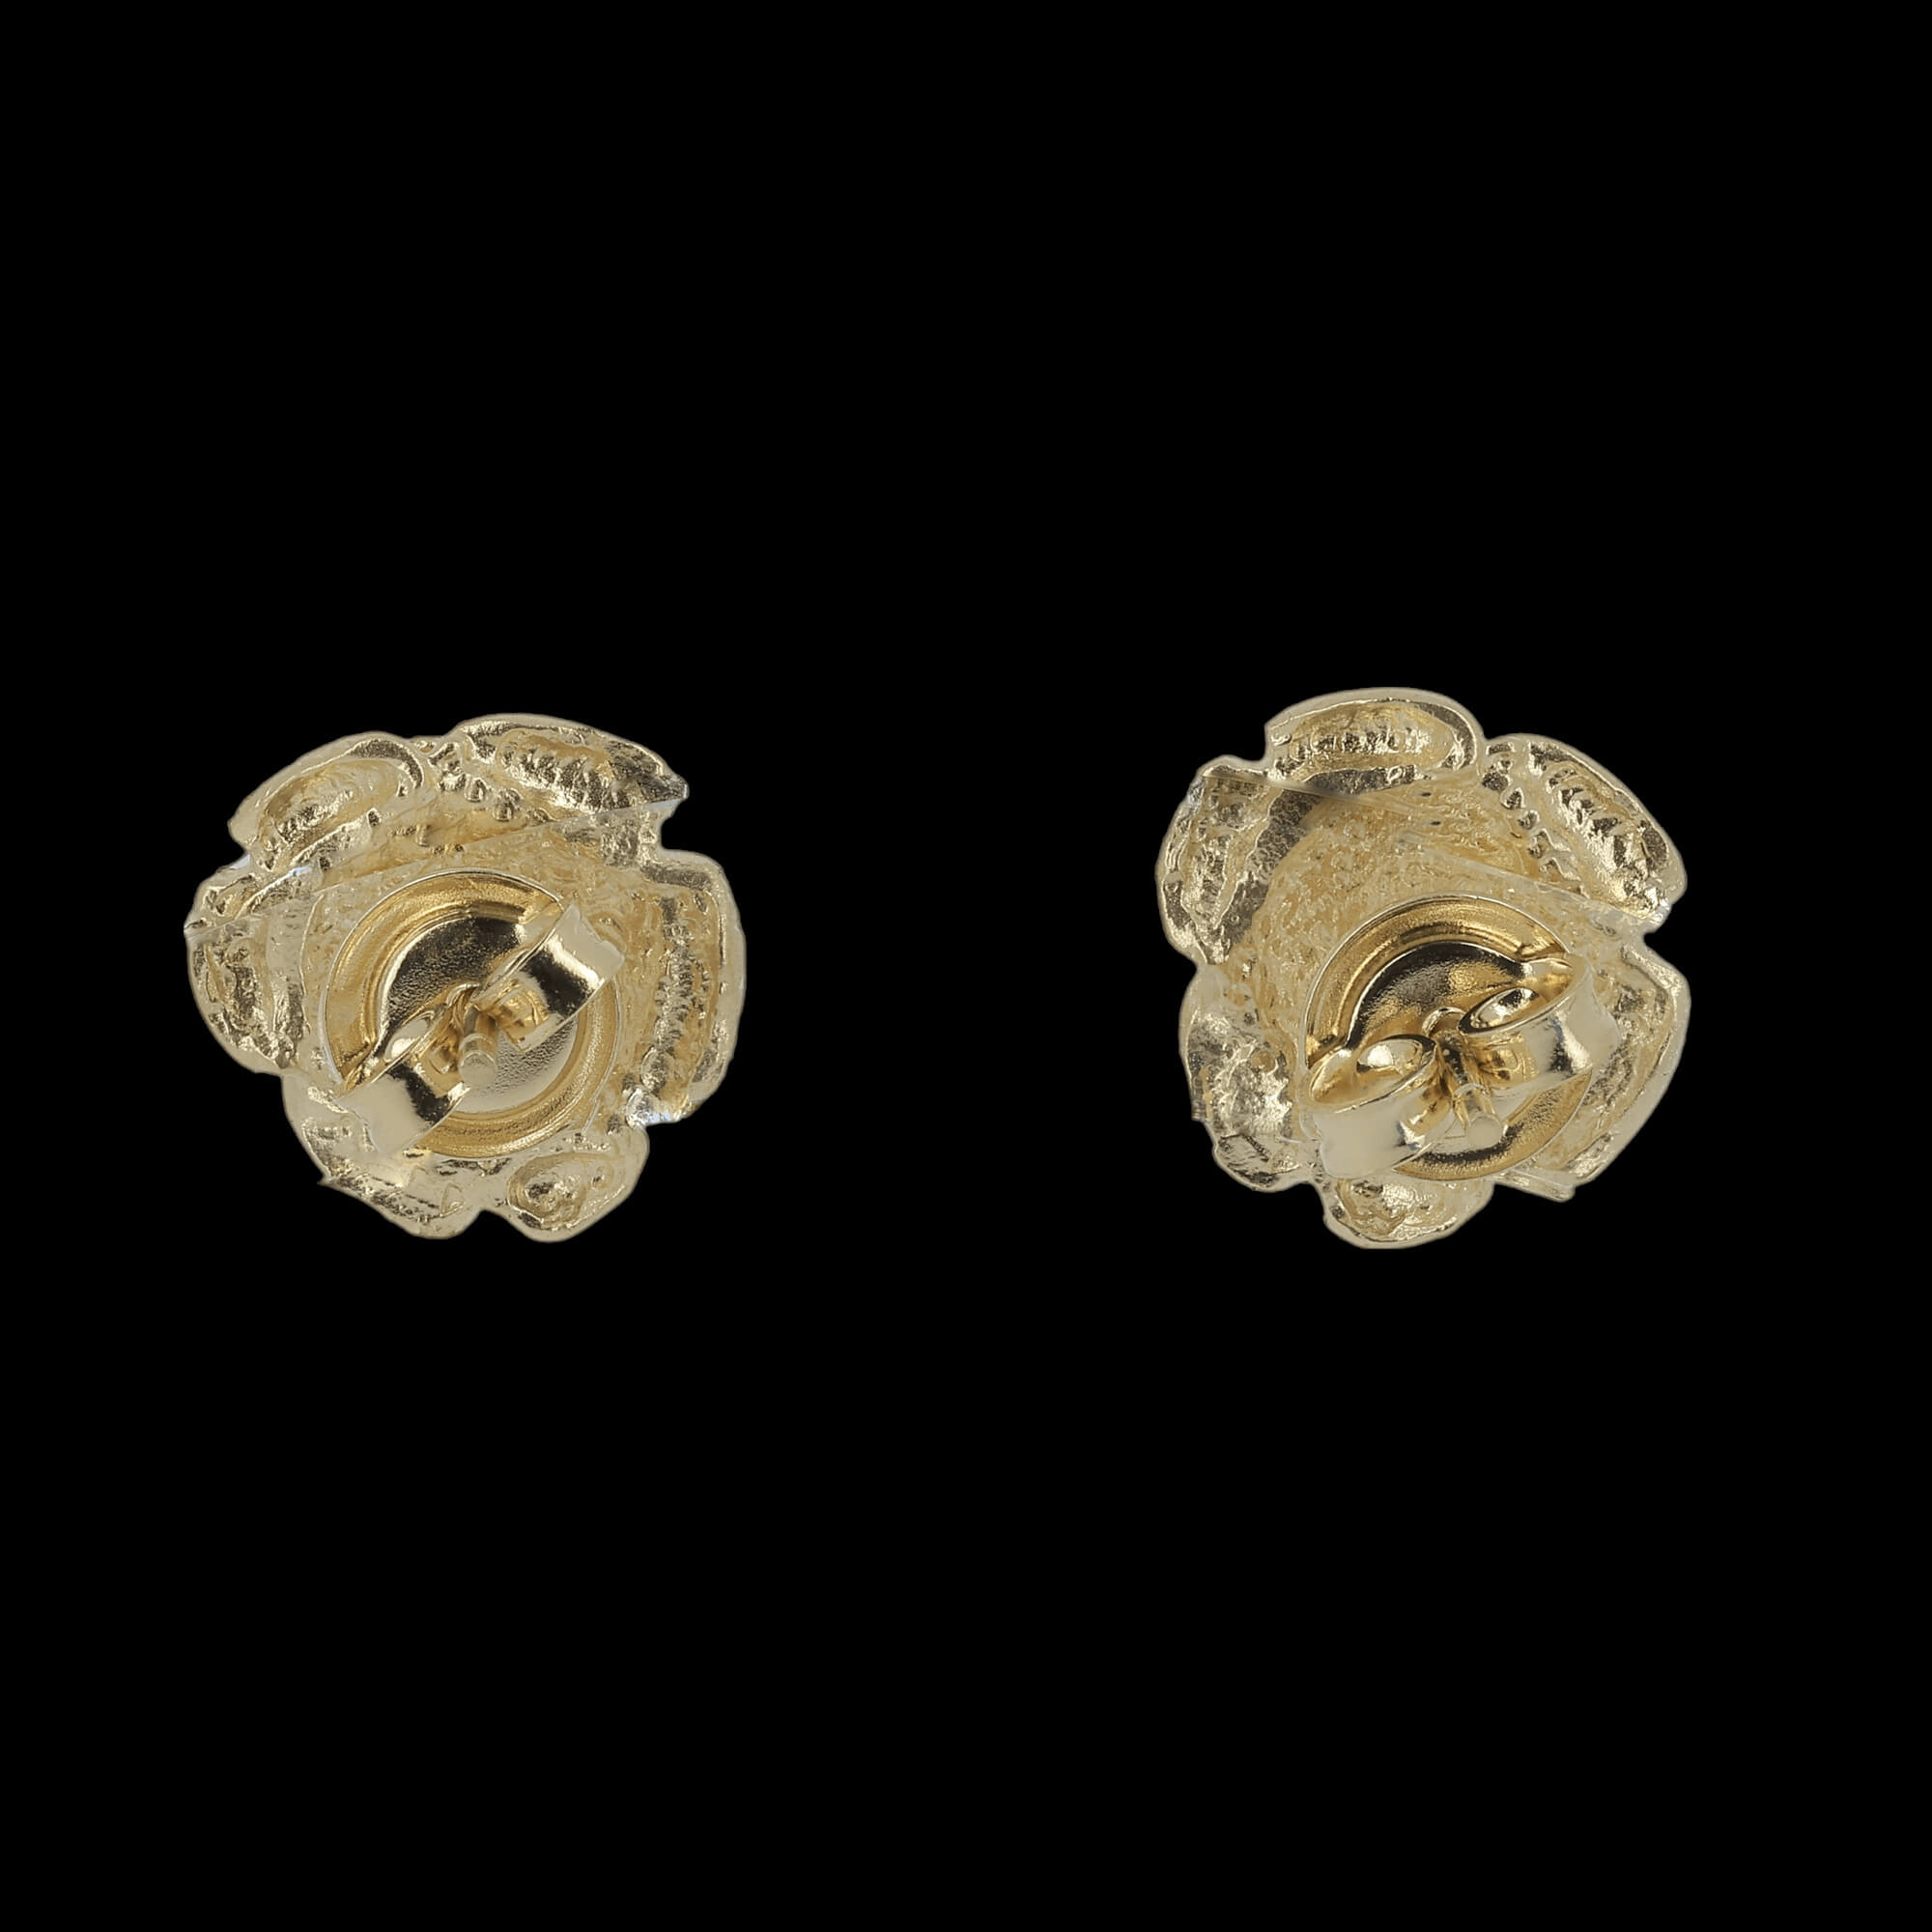 Gilded and beautiful flower earrings